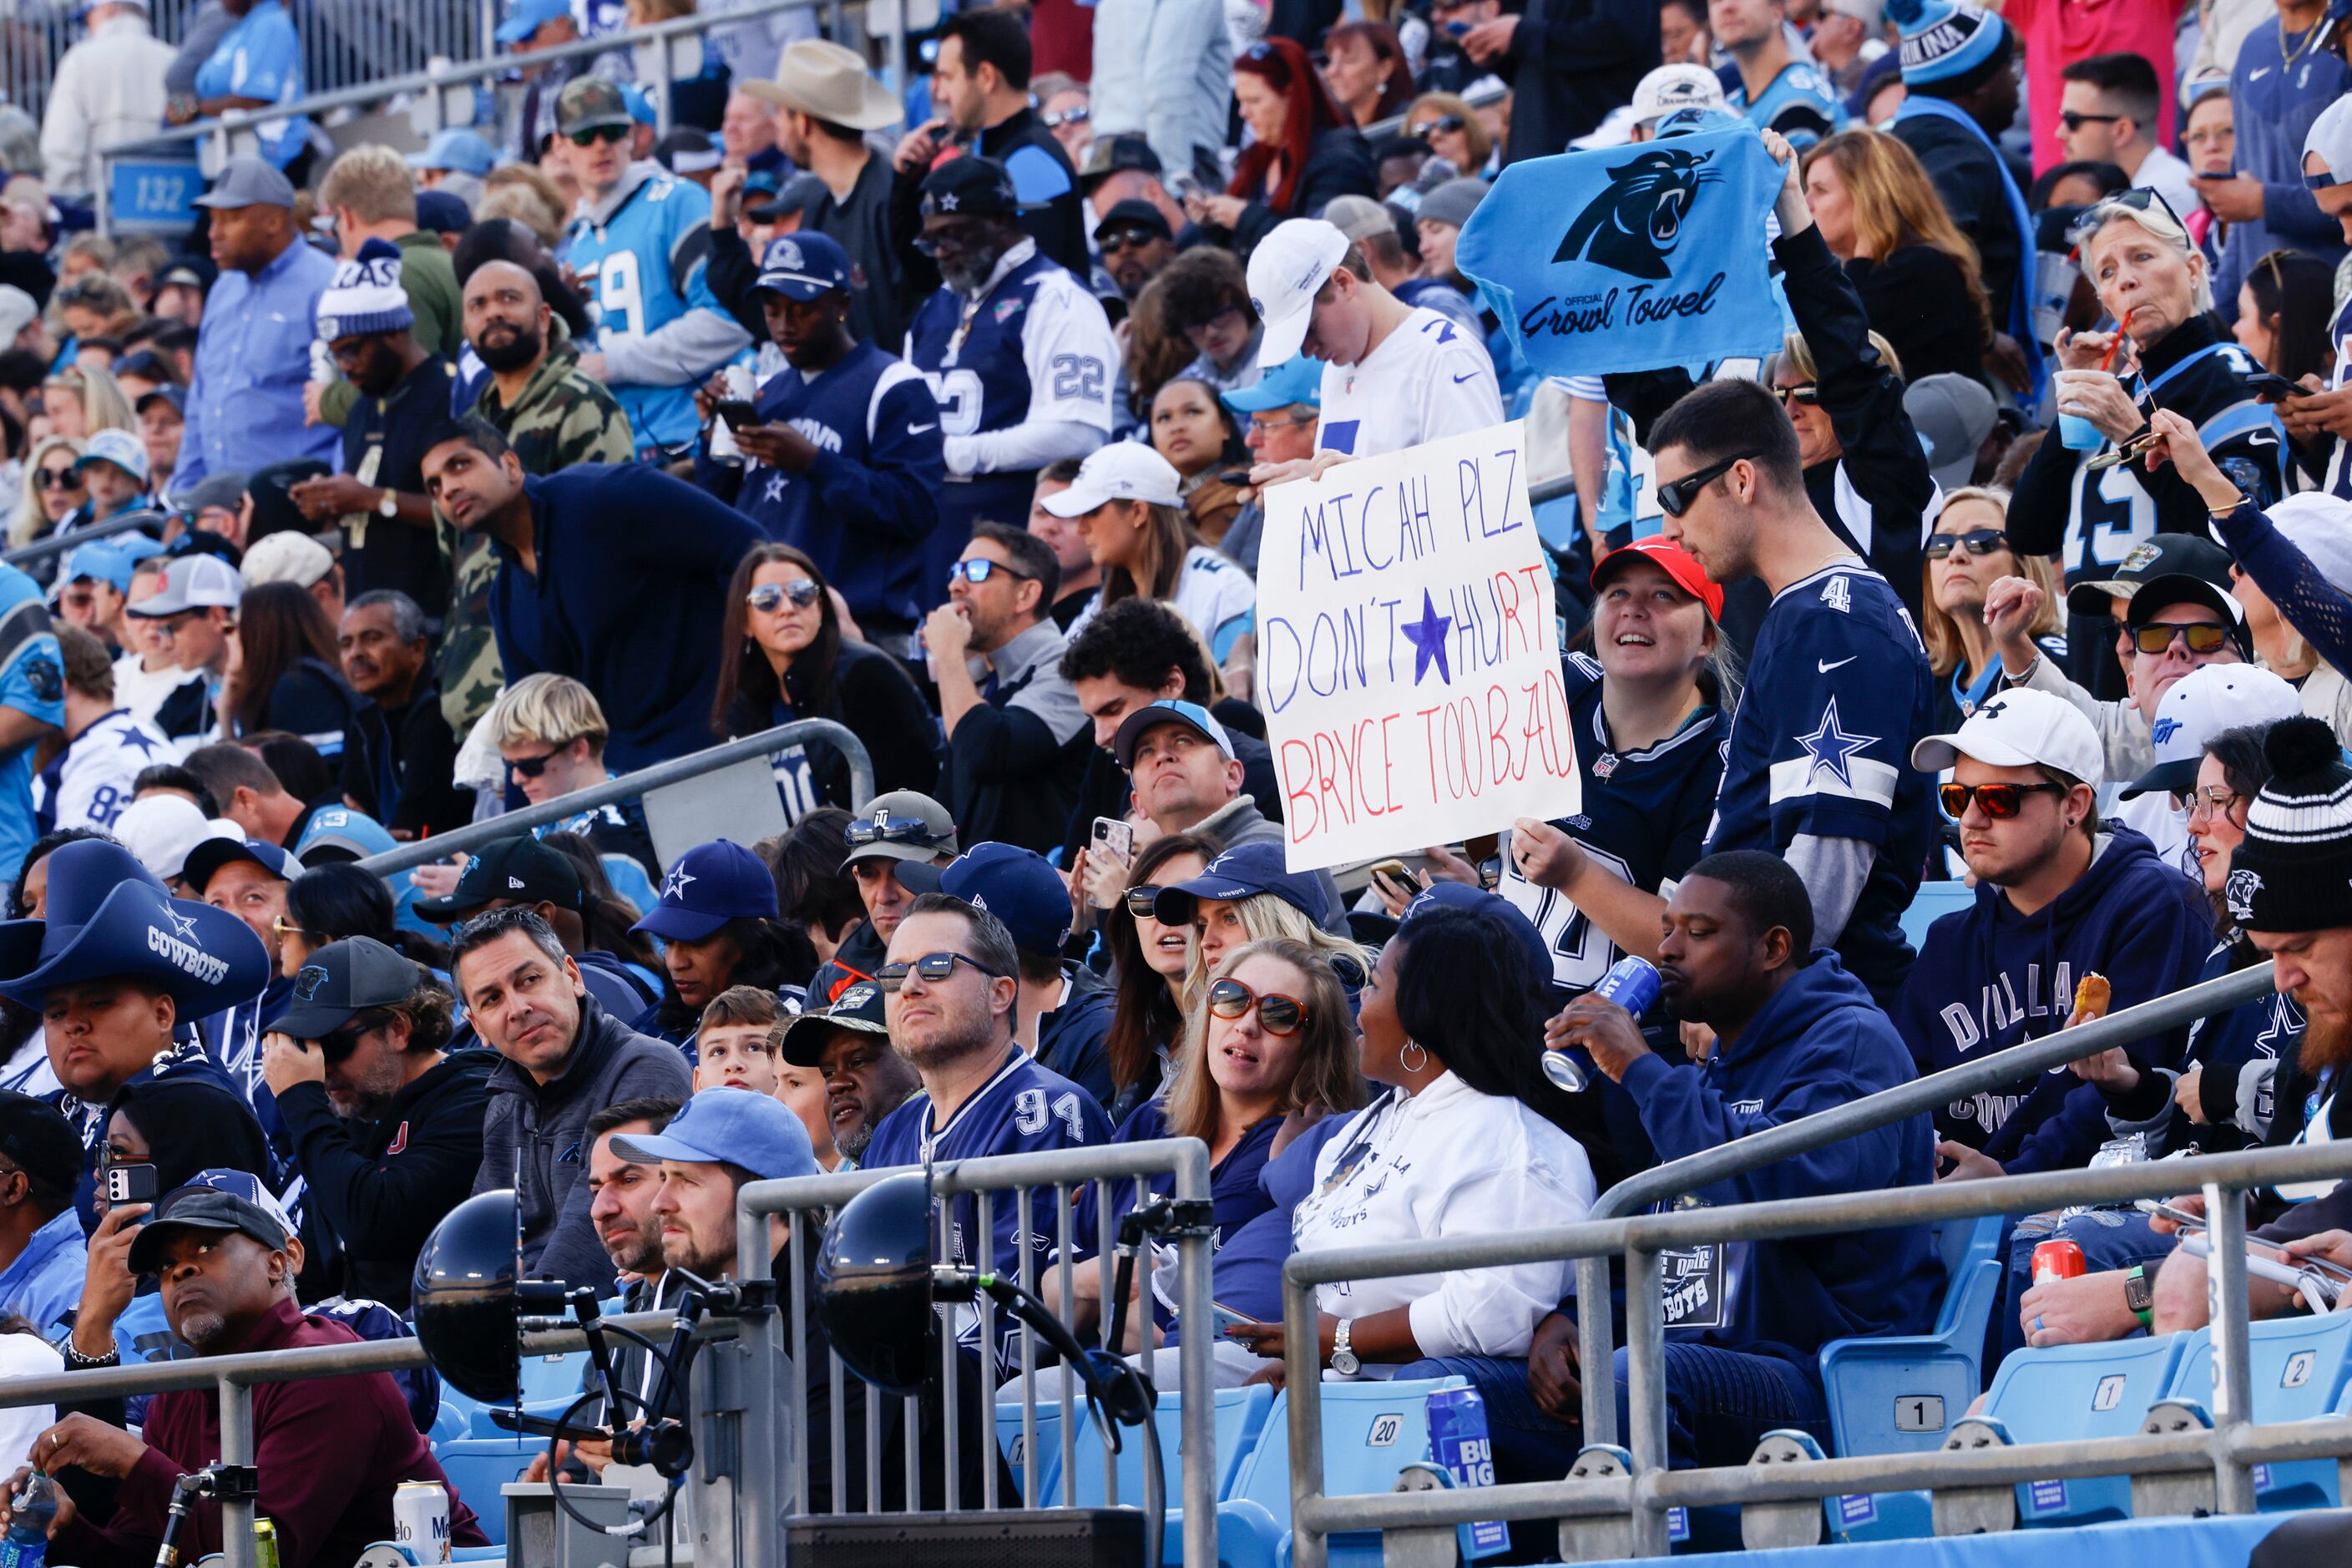 Dallas Cowboys fans hold a sign that reads “Micah plz don’t hurt Bryce too bad” during the...